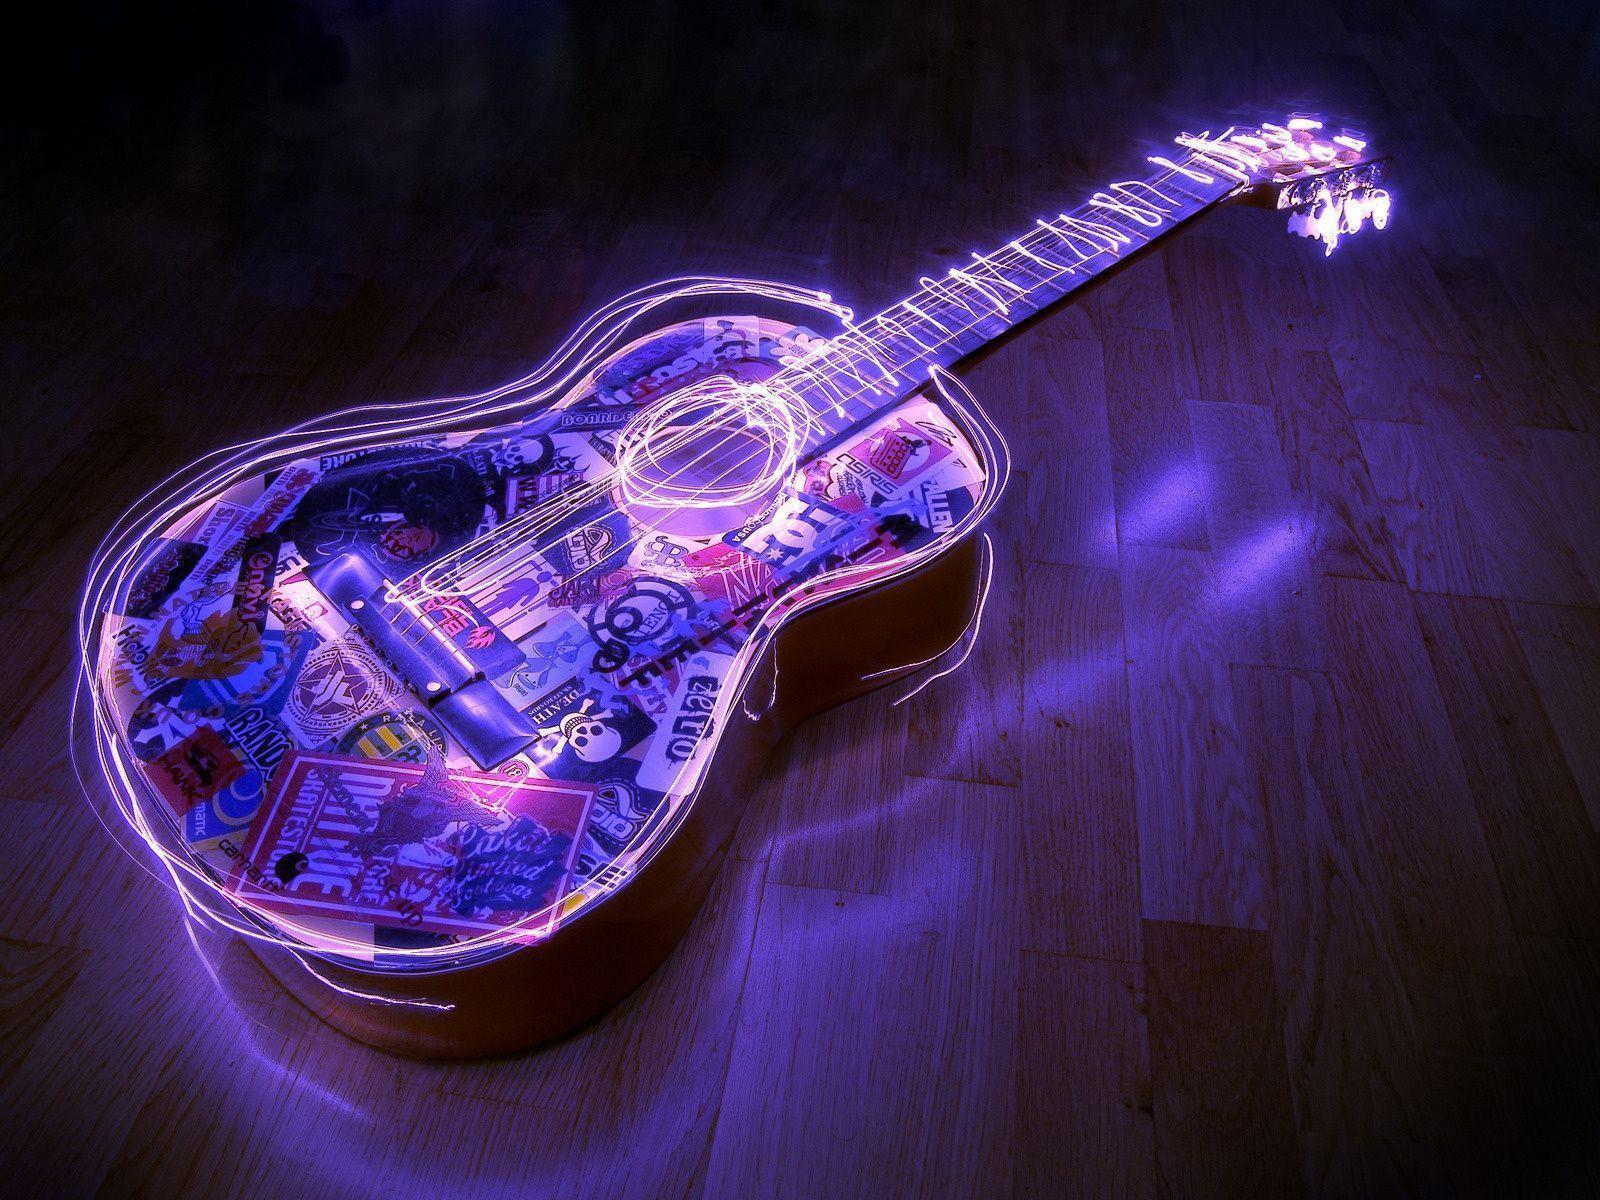 Wallpaper For > Awesome Guitar Background